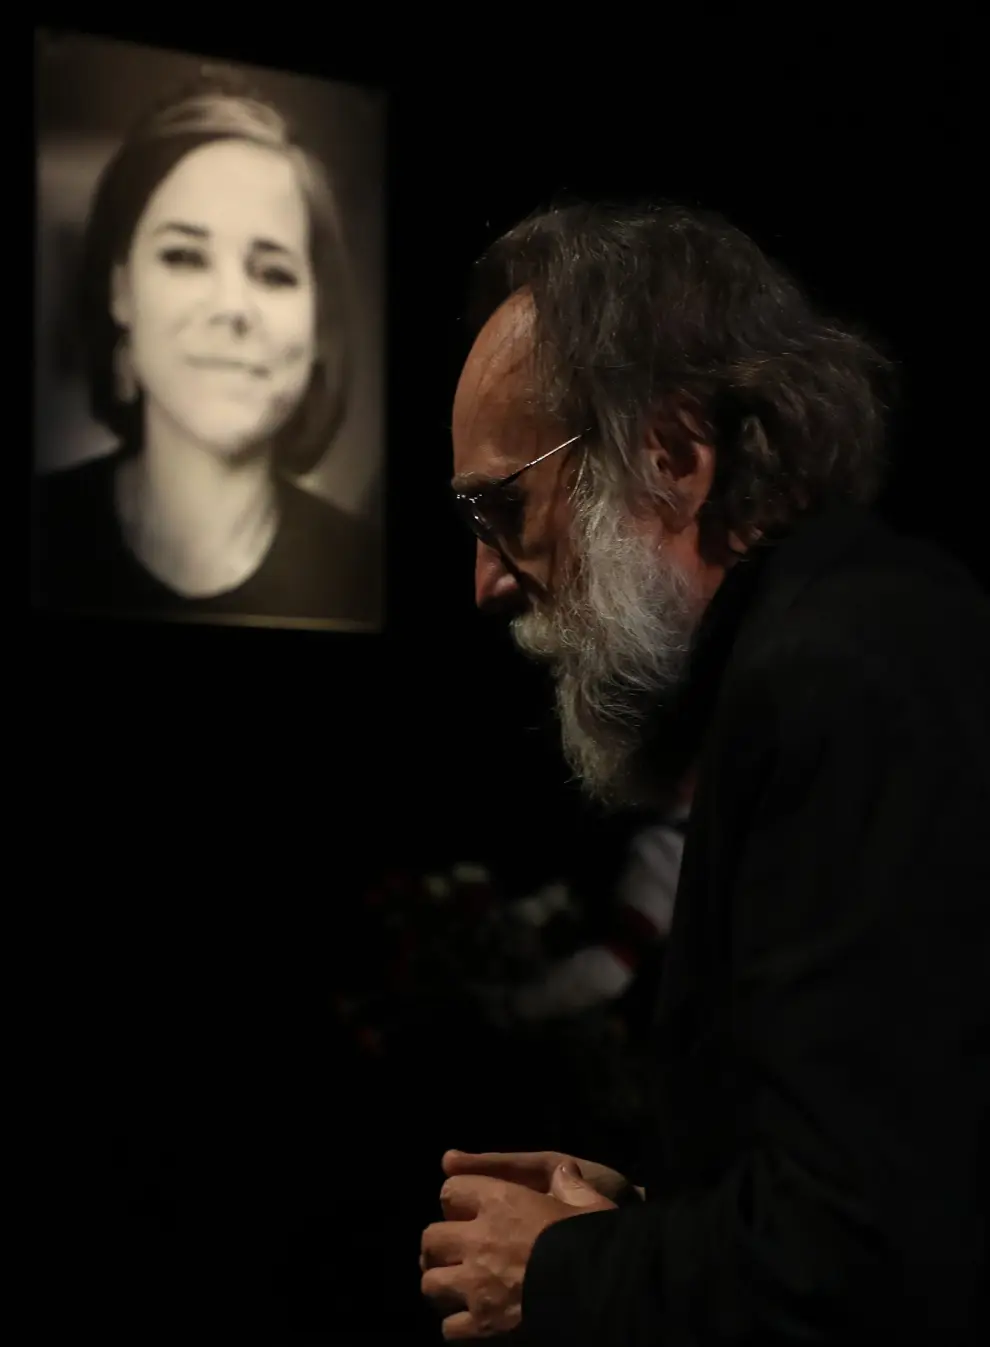 Russian political scientist and ideologue Alexander Dugin attends a memorial service for his daughter Darya Dugina, who was killed in a car bomb attack, in Moscow, Russia August 23, 2022. REUTERS/Maxim Shemetov UKRAINE-CRISIS/DUGINA-CARBOMB-MEMORIAL